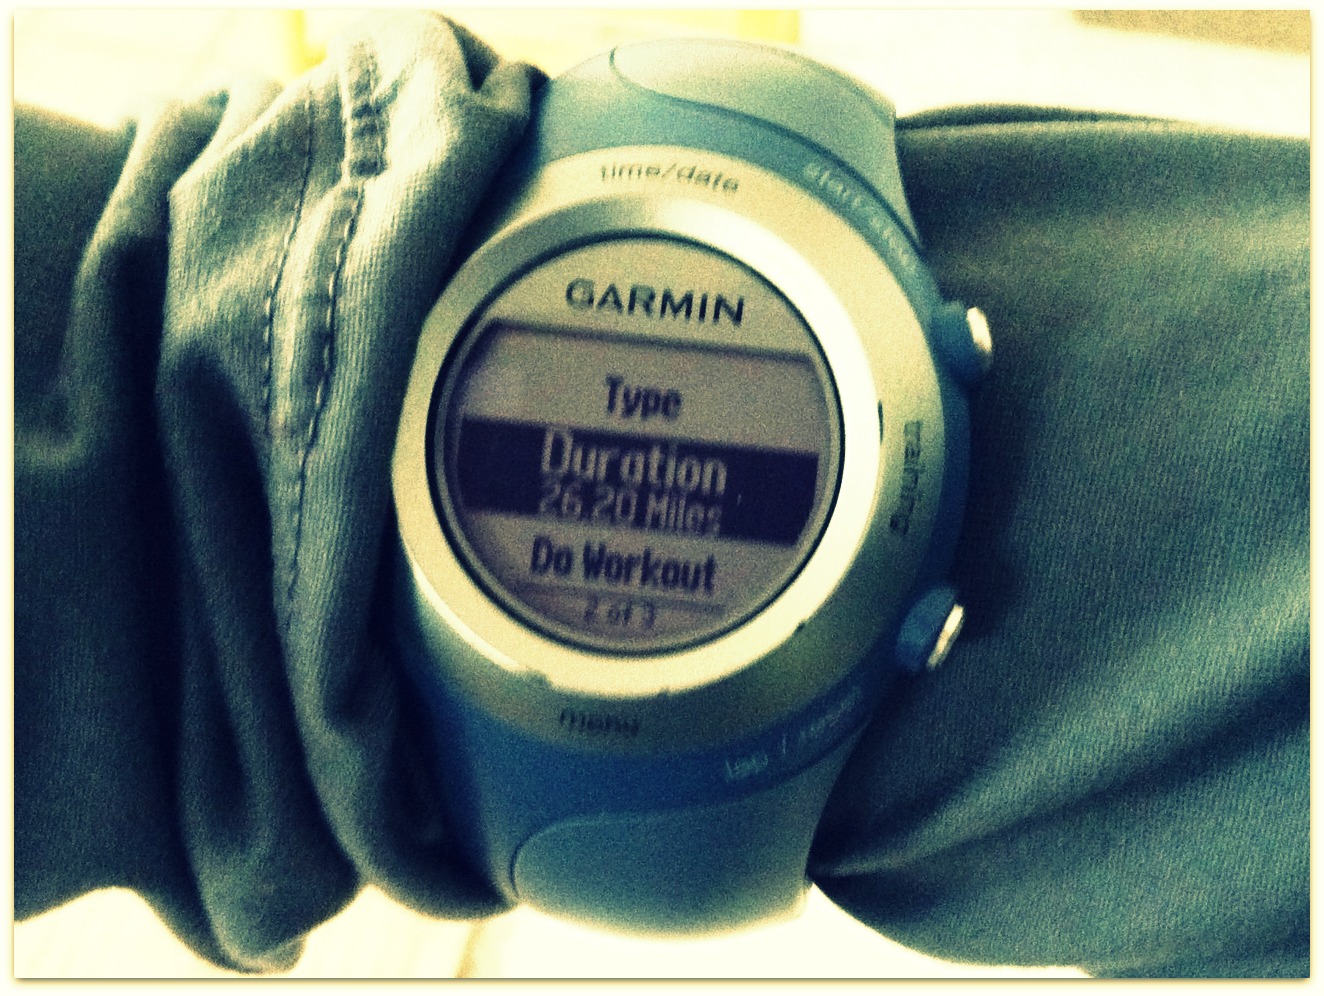 Sorry for hating on you, Garmin!